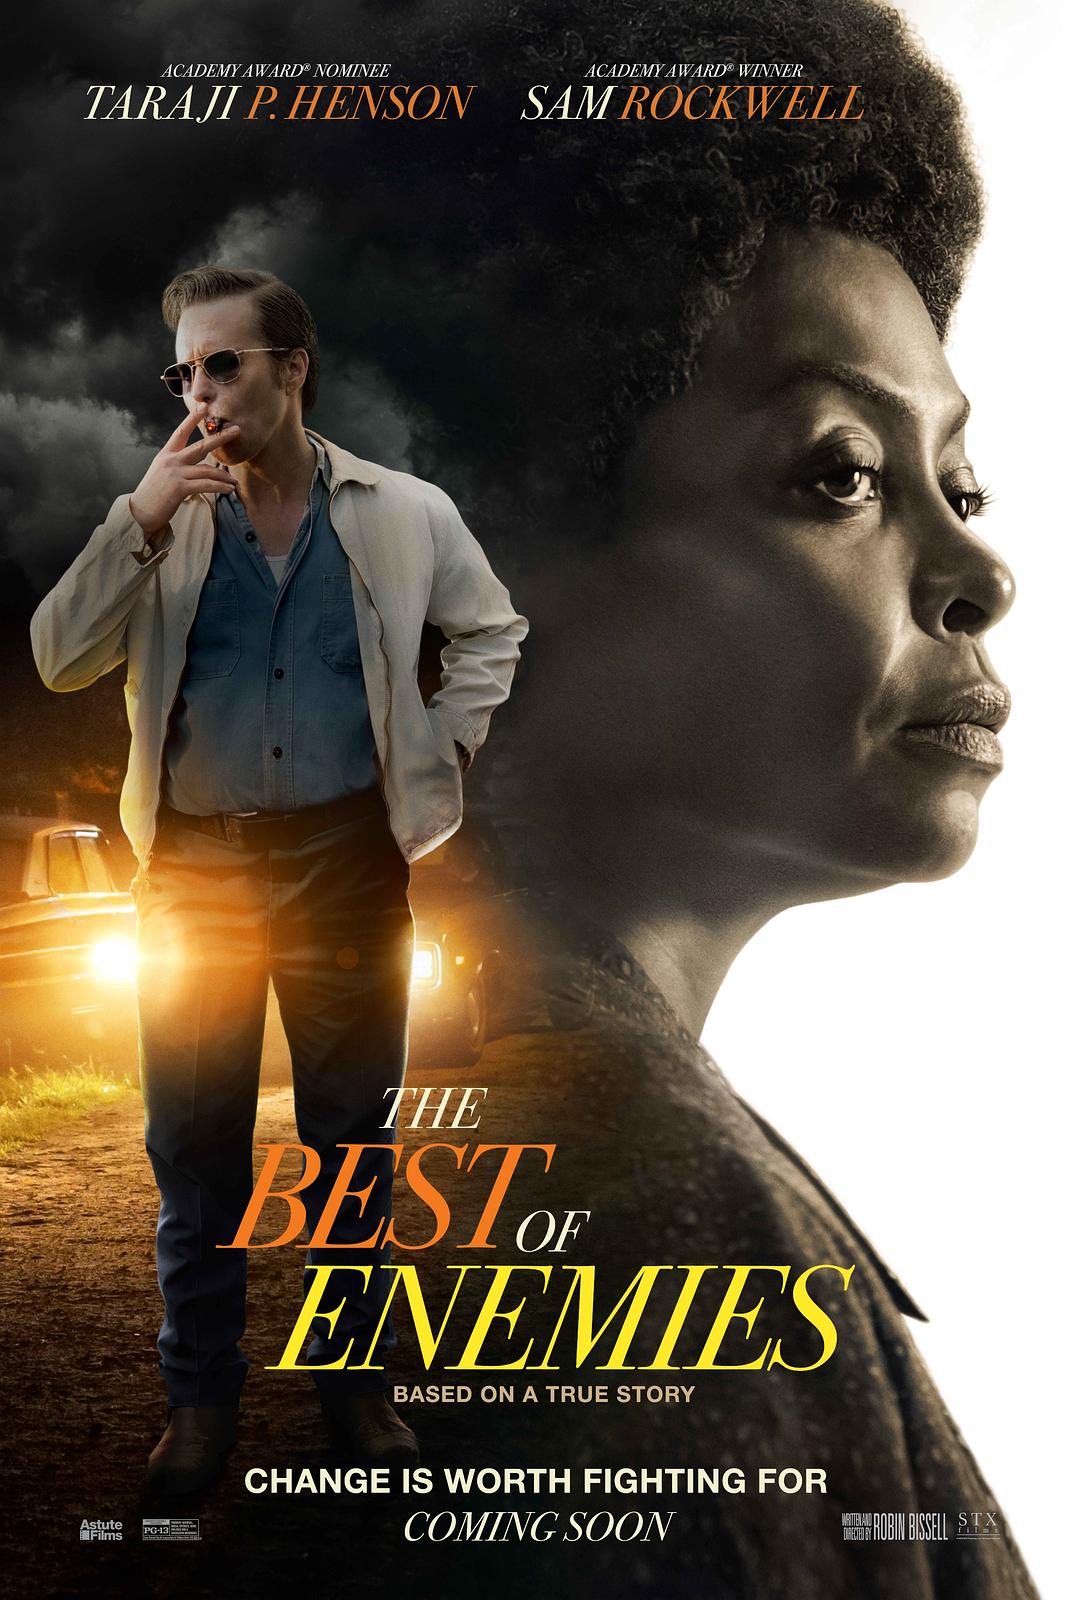 ѵ The.Best.of.Enemies.2019.1080p.BluRay.AVC.DTS-HD.MA.5.1-FGT 44.44GB-1.png